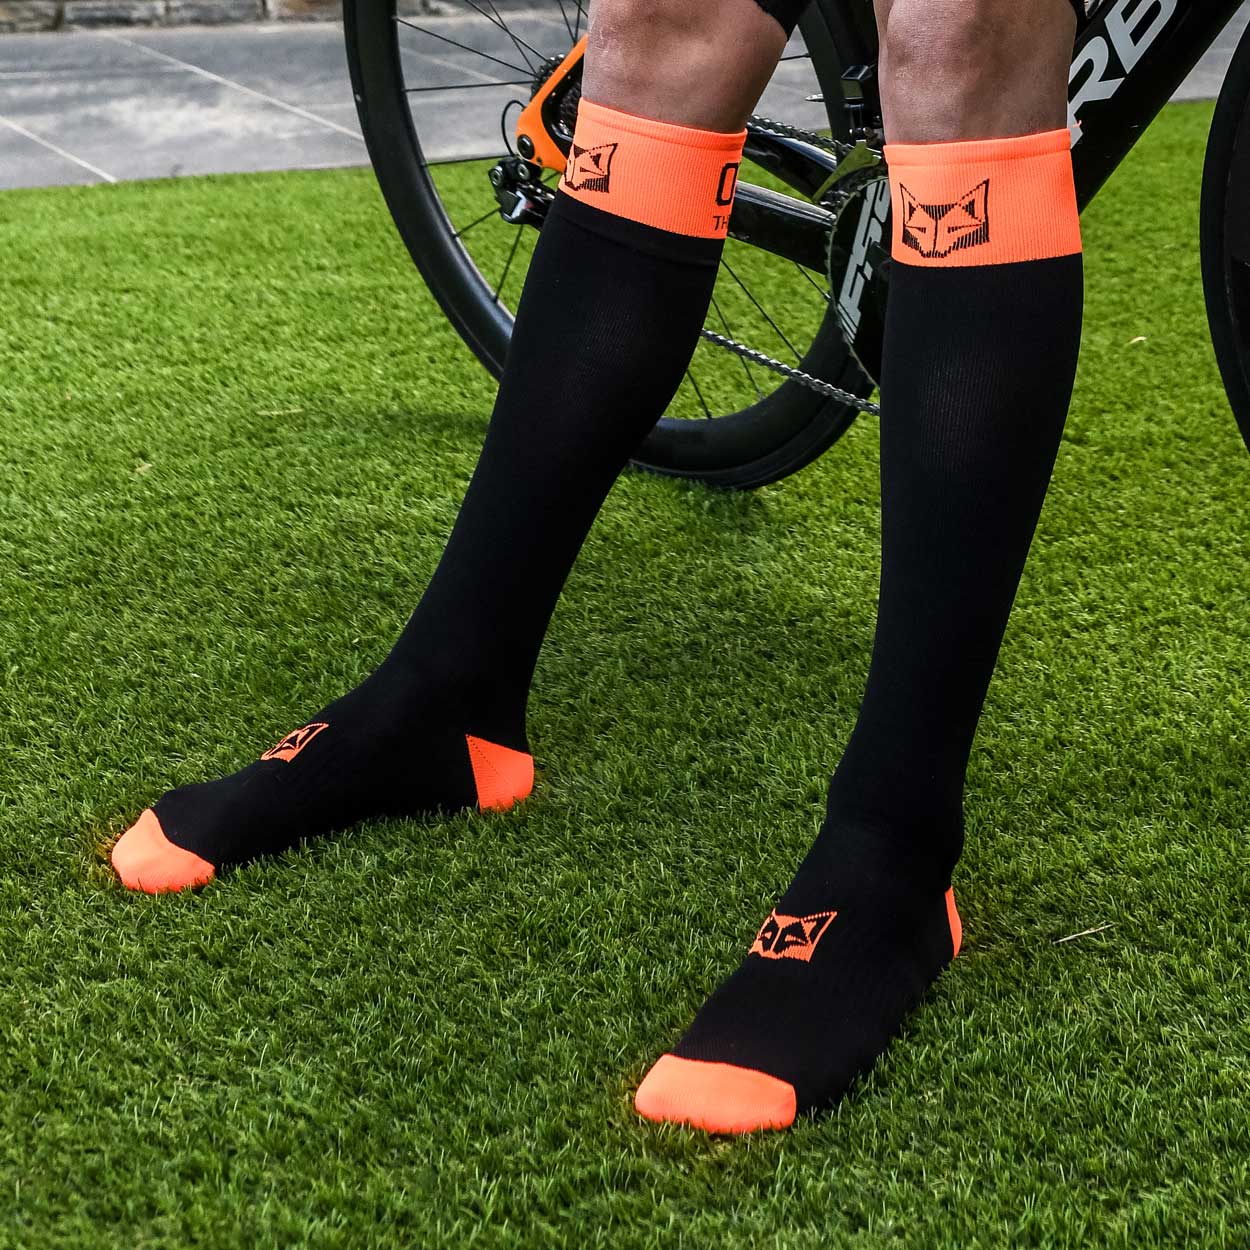 Recovery Compression Socks